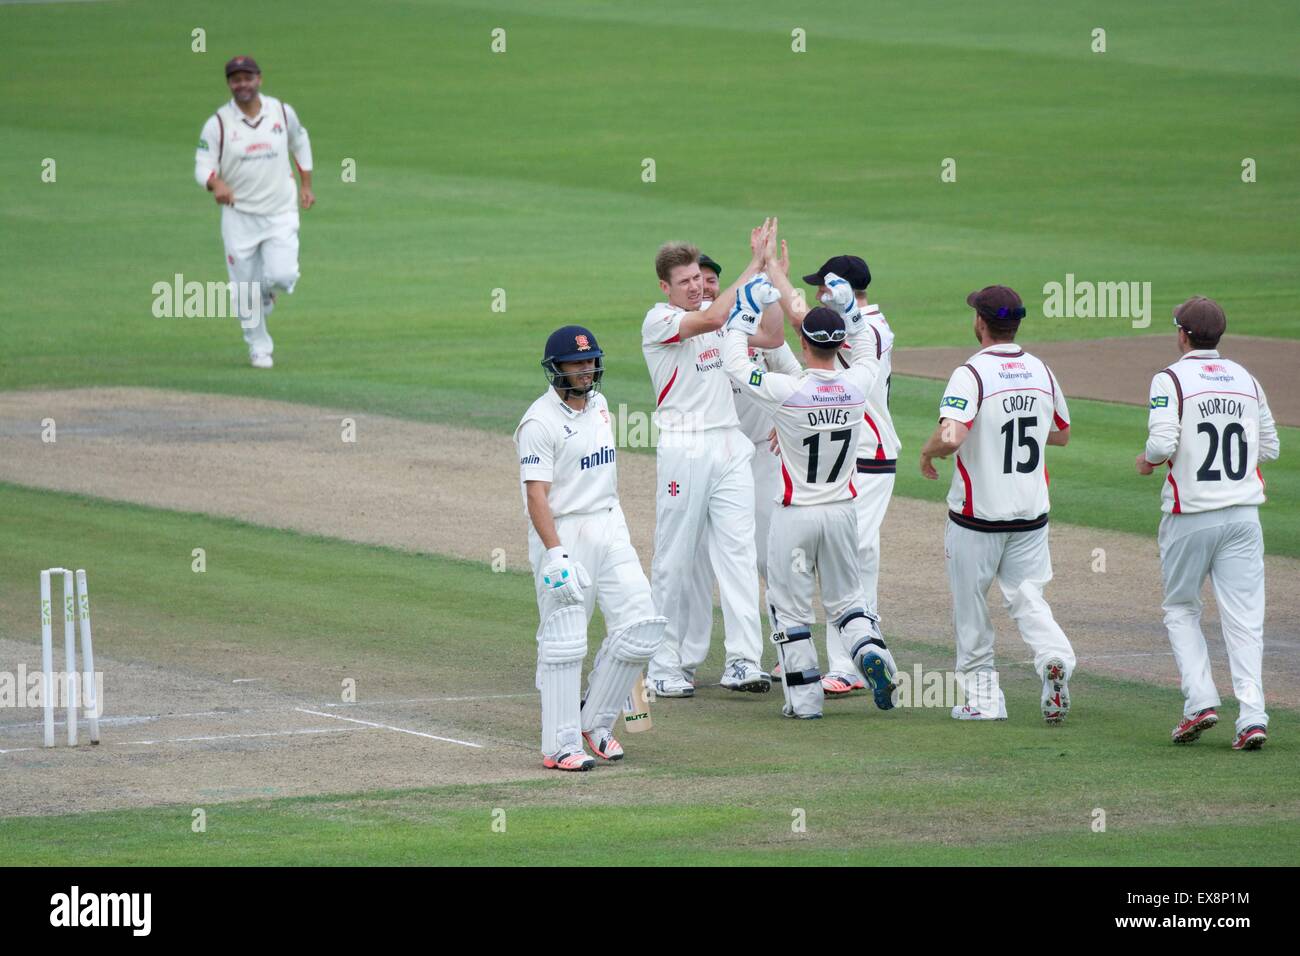 Manchester UK 9th July 2015  James Faulkner (Lancashire) celebrates his fifth wicket, bowling out Greg Smith for 3,  on the fourth day of the County Championship match between Lancashire and Essex at Emirates Old Trafford with Lancashire pressing for an unlikely win in a rain-affected match. Faulkner finished with five wickets. Cricket Lancashire v Essex Manchester, UK Credit:  John Fryer/Alamy Live News Stock Photo